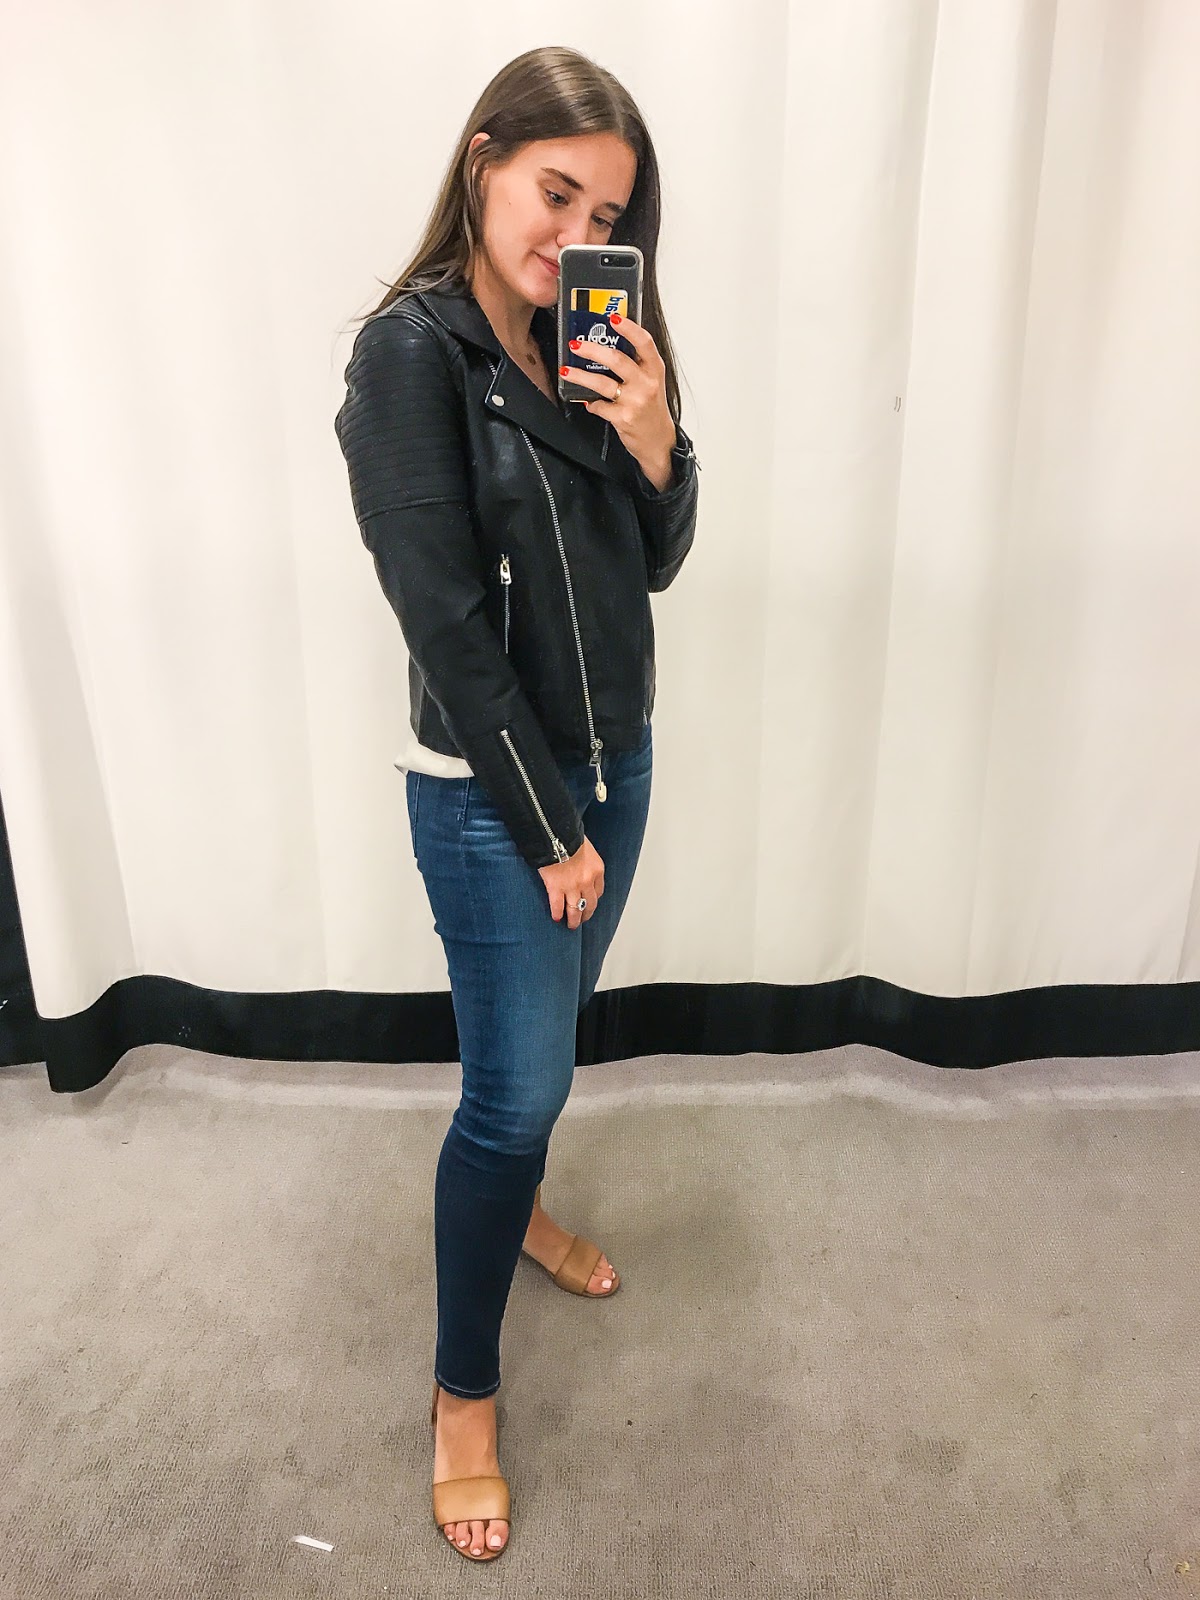 Nordstrom Anniversary Dressing Room Try On featured by popular New York fashion blogger, Covering the Bases